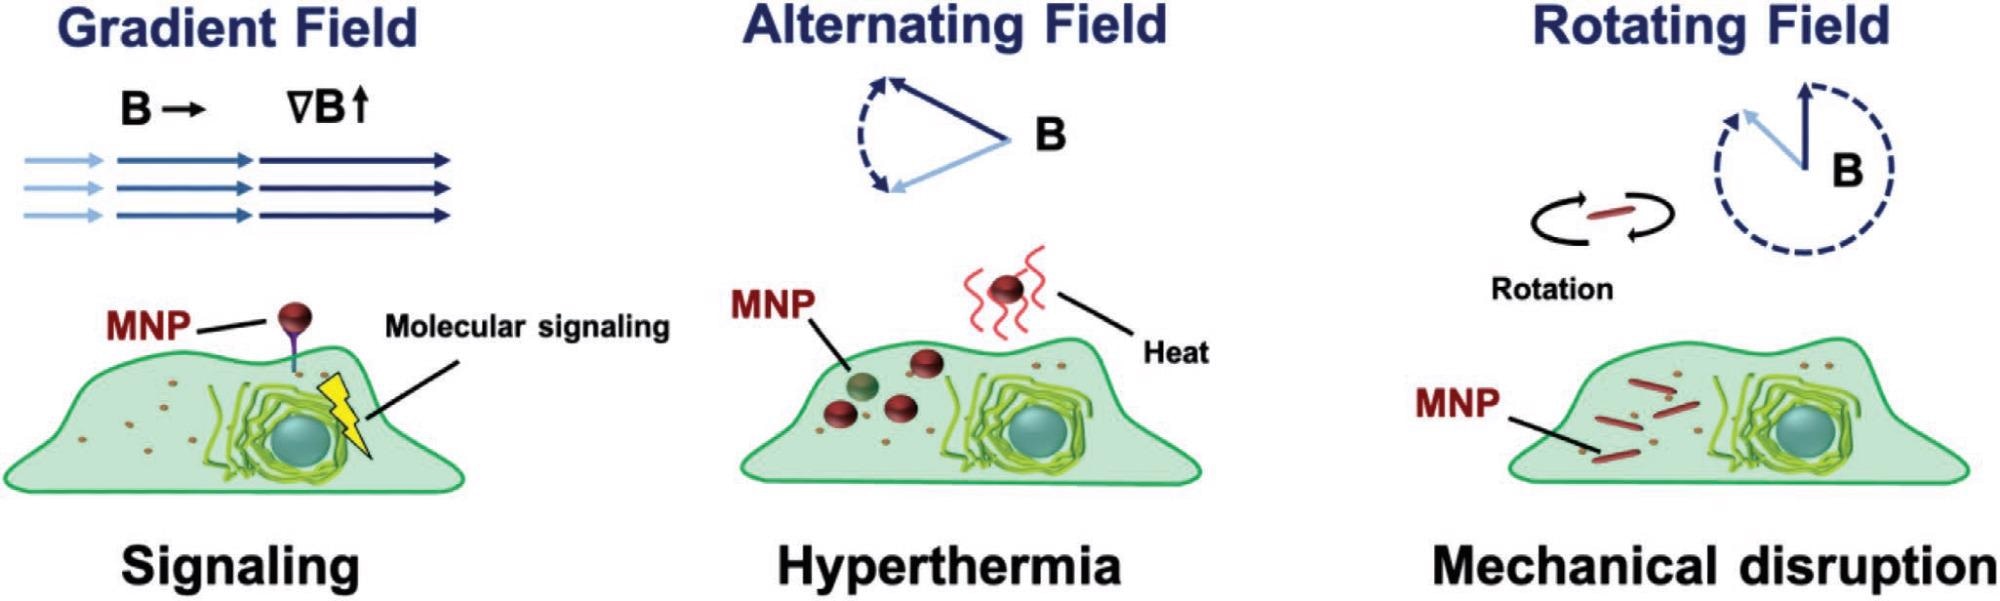 Magnetomechanical induction of cell death. Stimulation of mechanosensitive receptors on the cell surface for the activation of apoptosis signaling (left), hyperthermia-mediated heat generation (middle), and mechanical ablation using rotating magnetic tubes/rods (right).